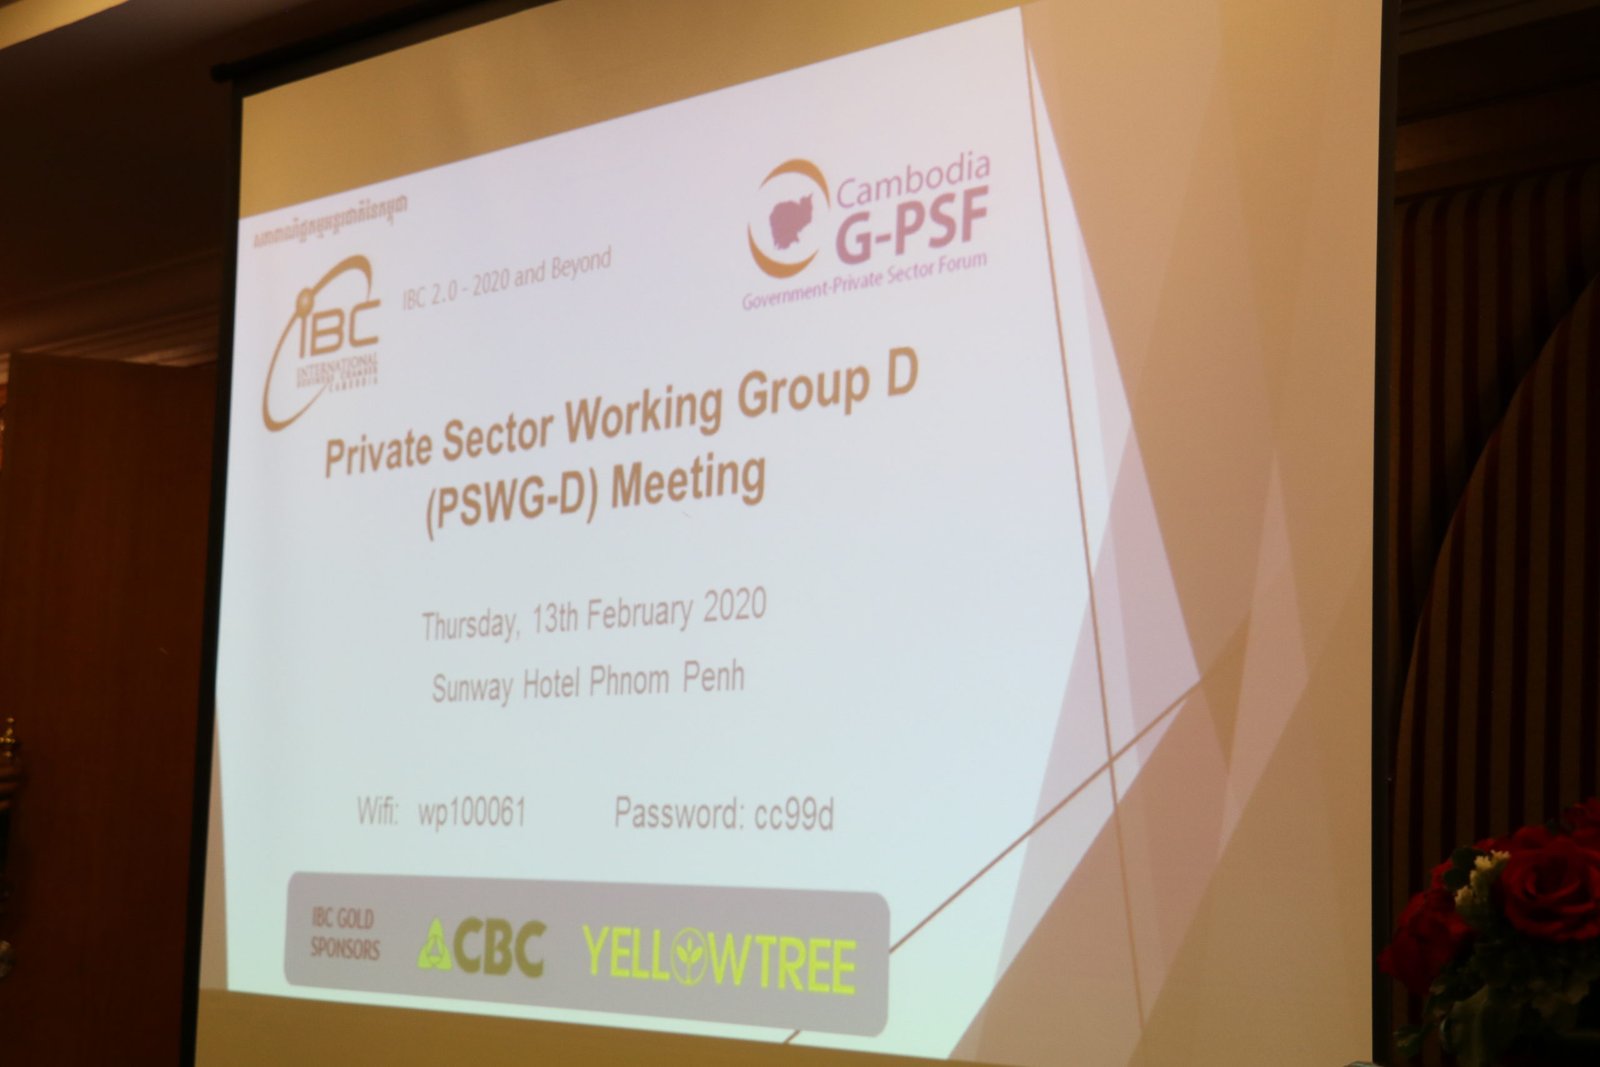 February 13 2020 - Private Sector Working Group D Meeting